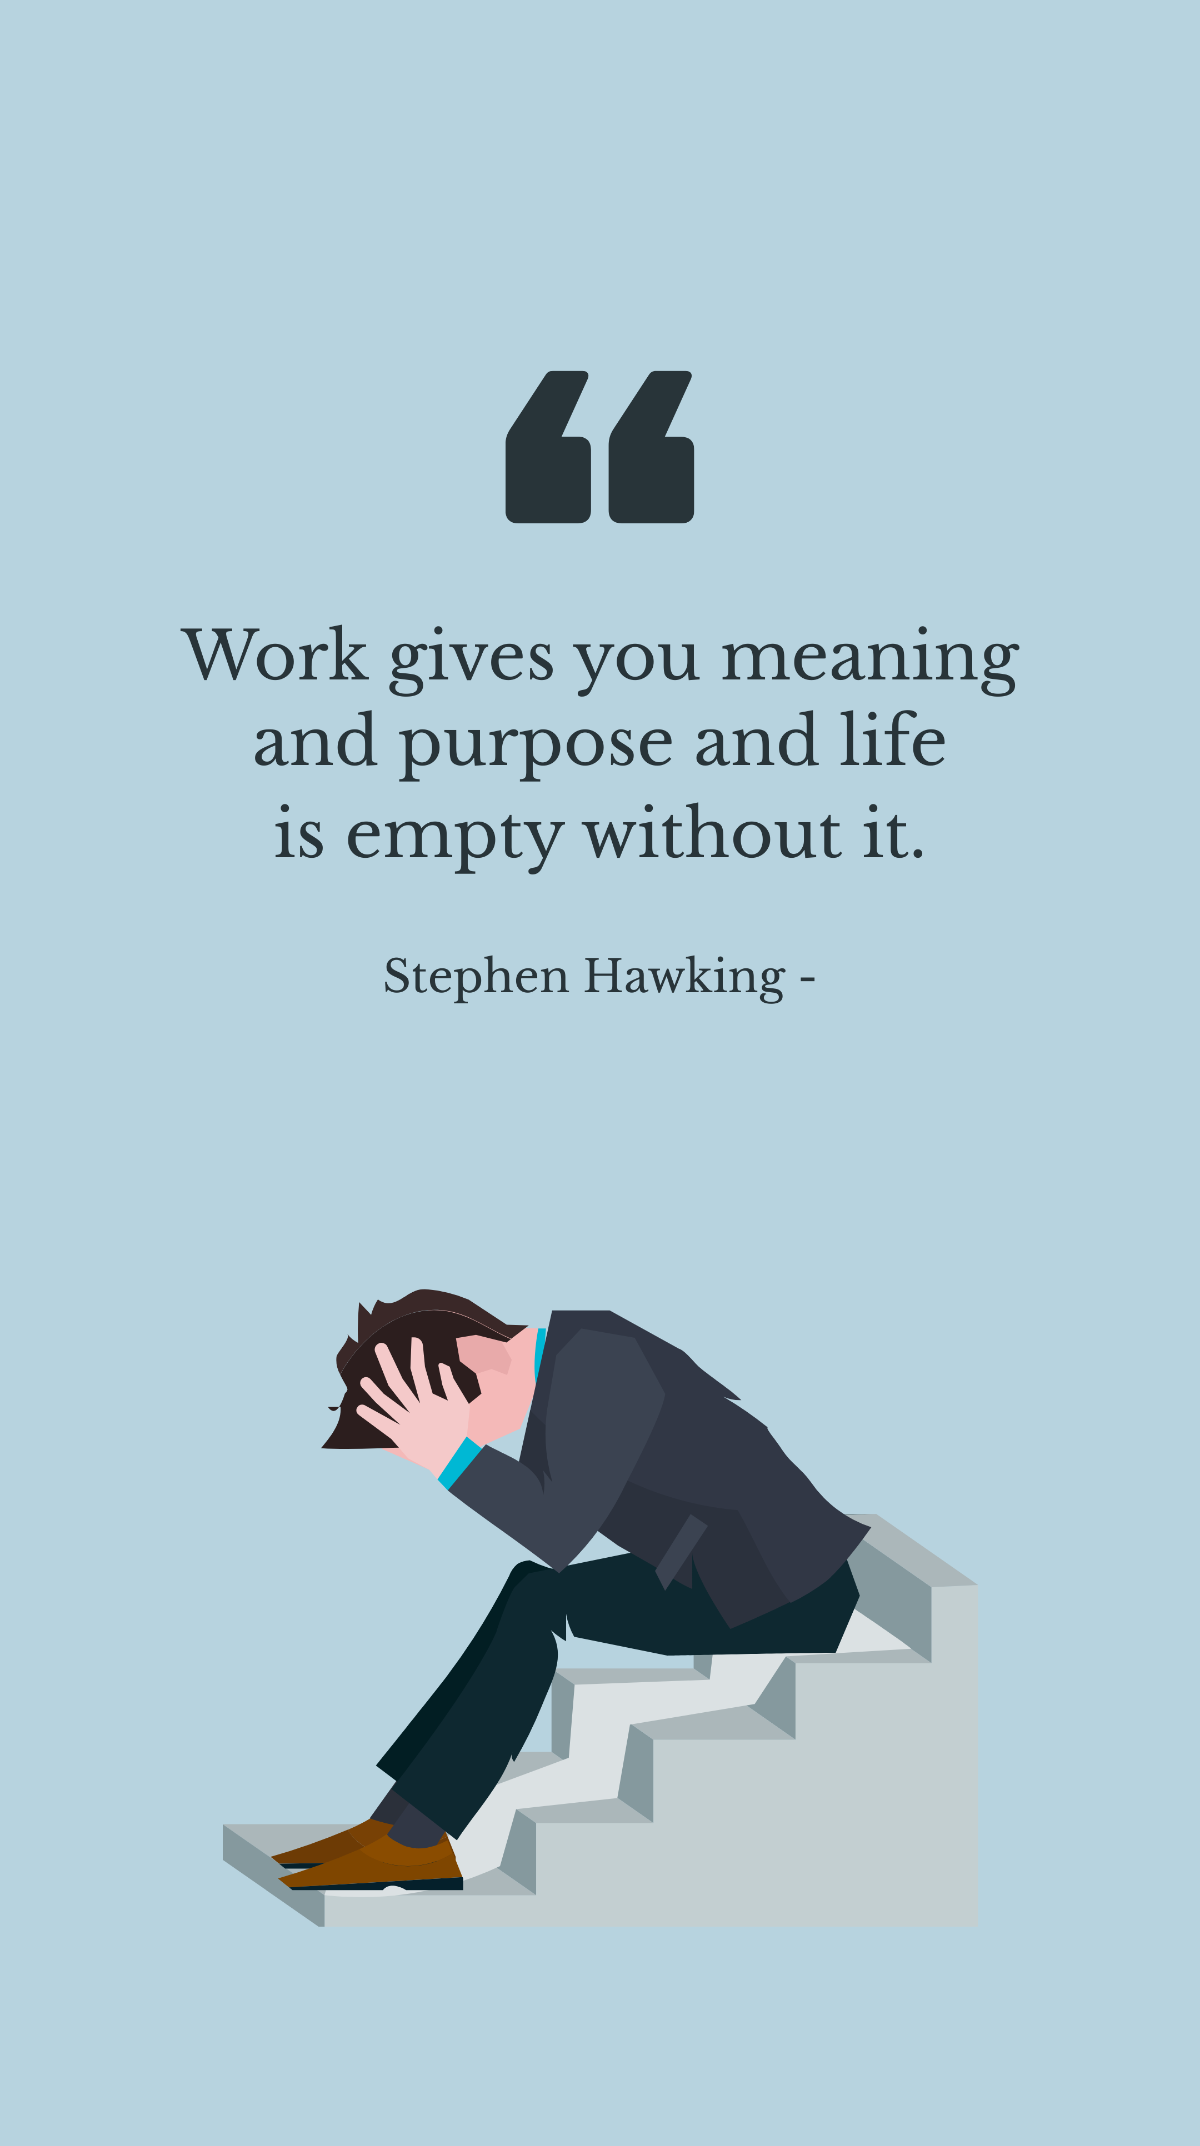 Free Stephen Hawking - Work gives you meaning and purpose and life is empty without it. Template